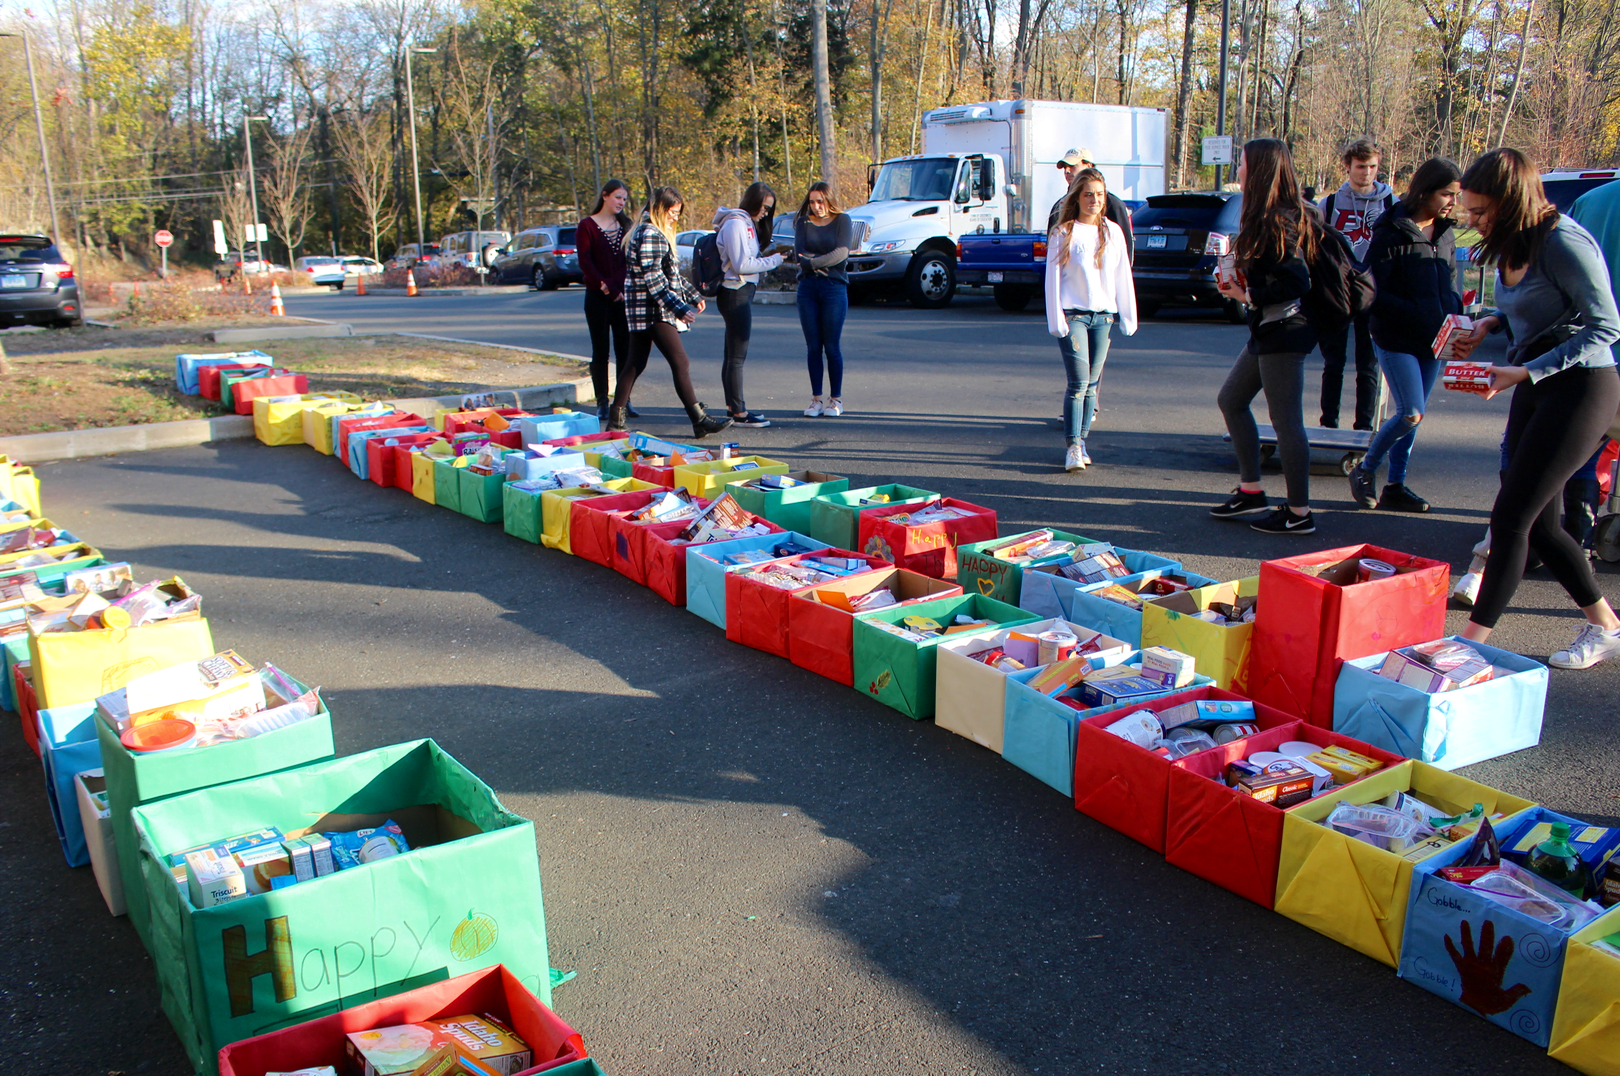 Organizing boxes in the south lot for the Roots & Shoots meal delivery to 150 local families. Nov 20, 2017 Photo: Leslie Yager